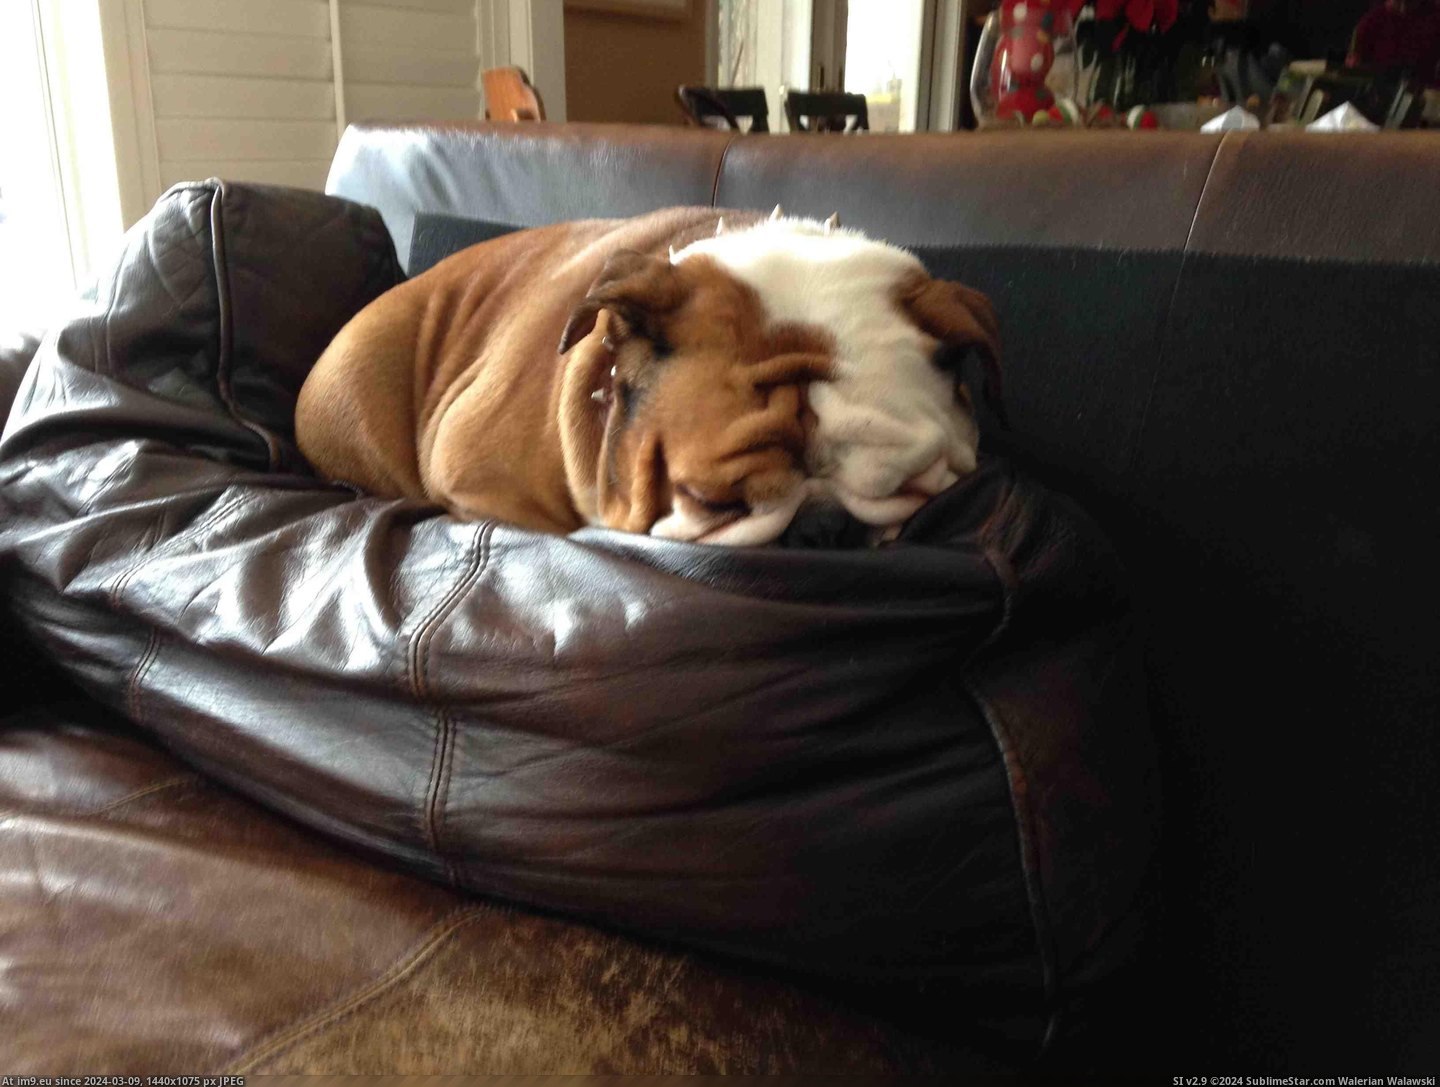 #Cute #But #She #Ruined #Cushions #How #Can #Couch [Aww] She has ruined most of my couch cushions but I can't help how cute she is... Pic. (Image of album My r/AWW favs))